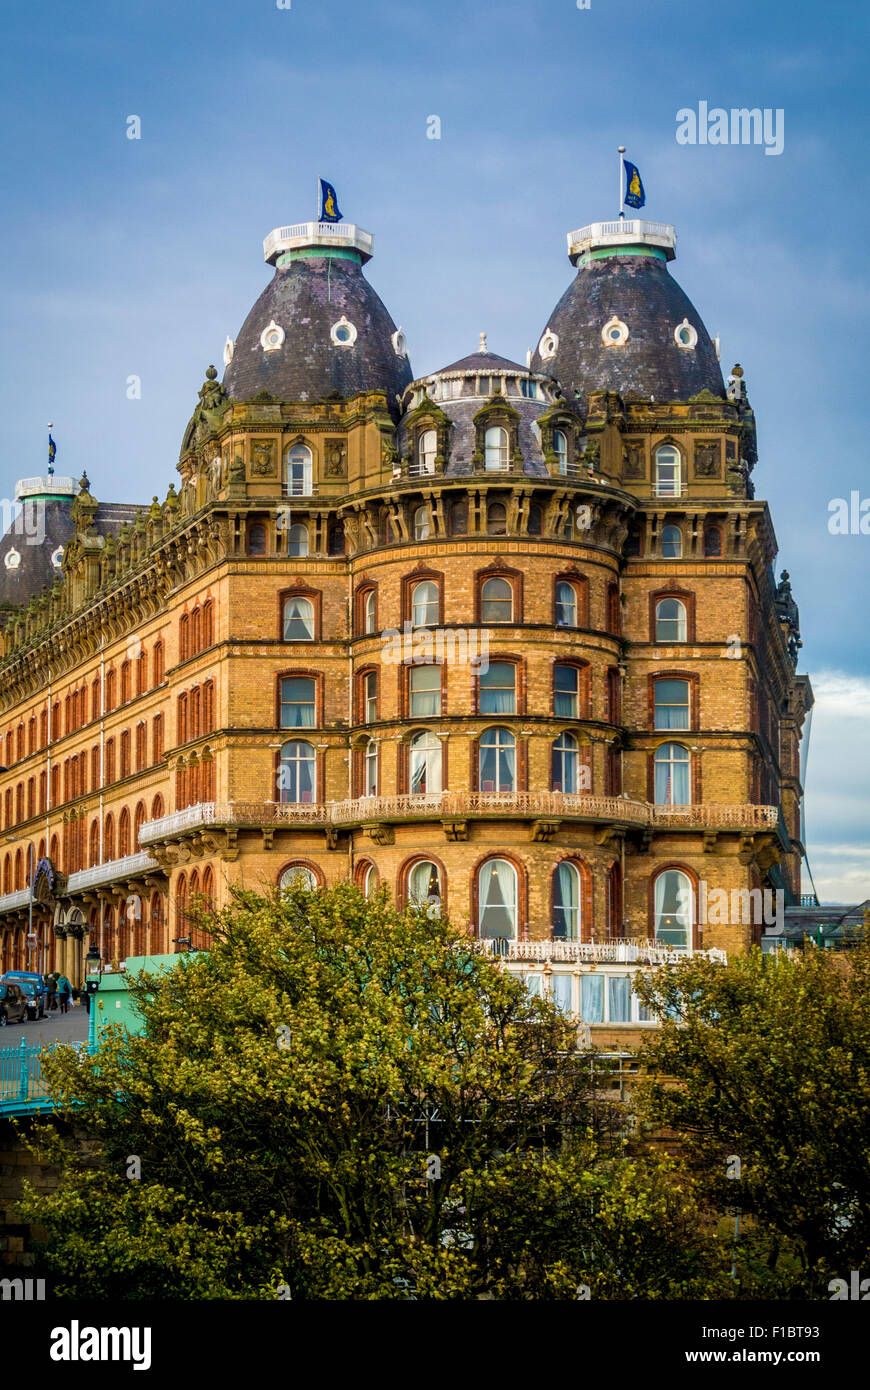 Grand Hotel, Scarborough. Grade ll listed building. Stock Photo